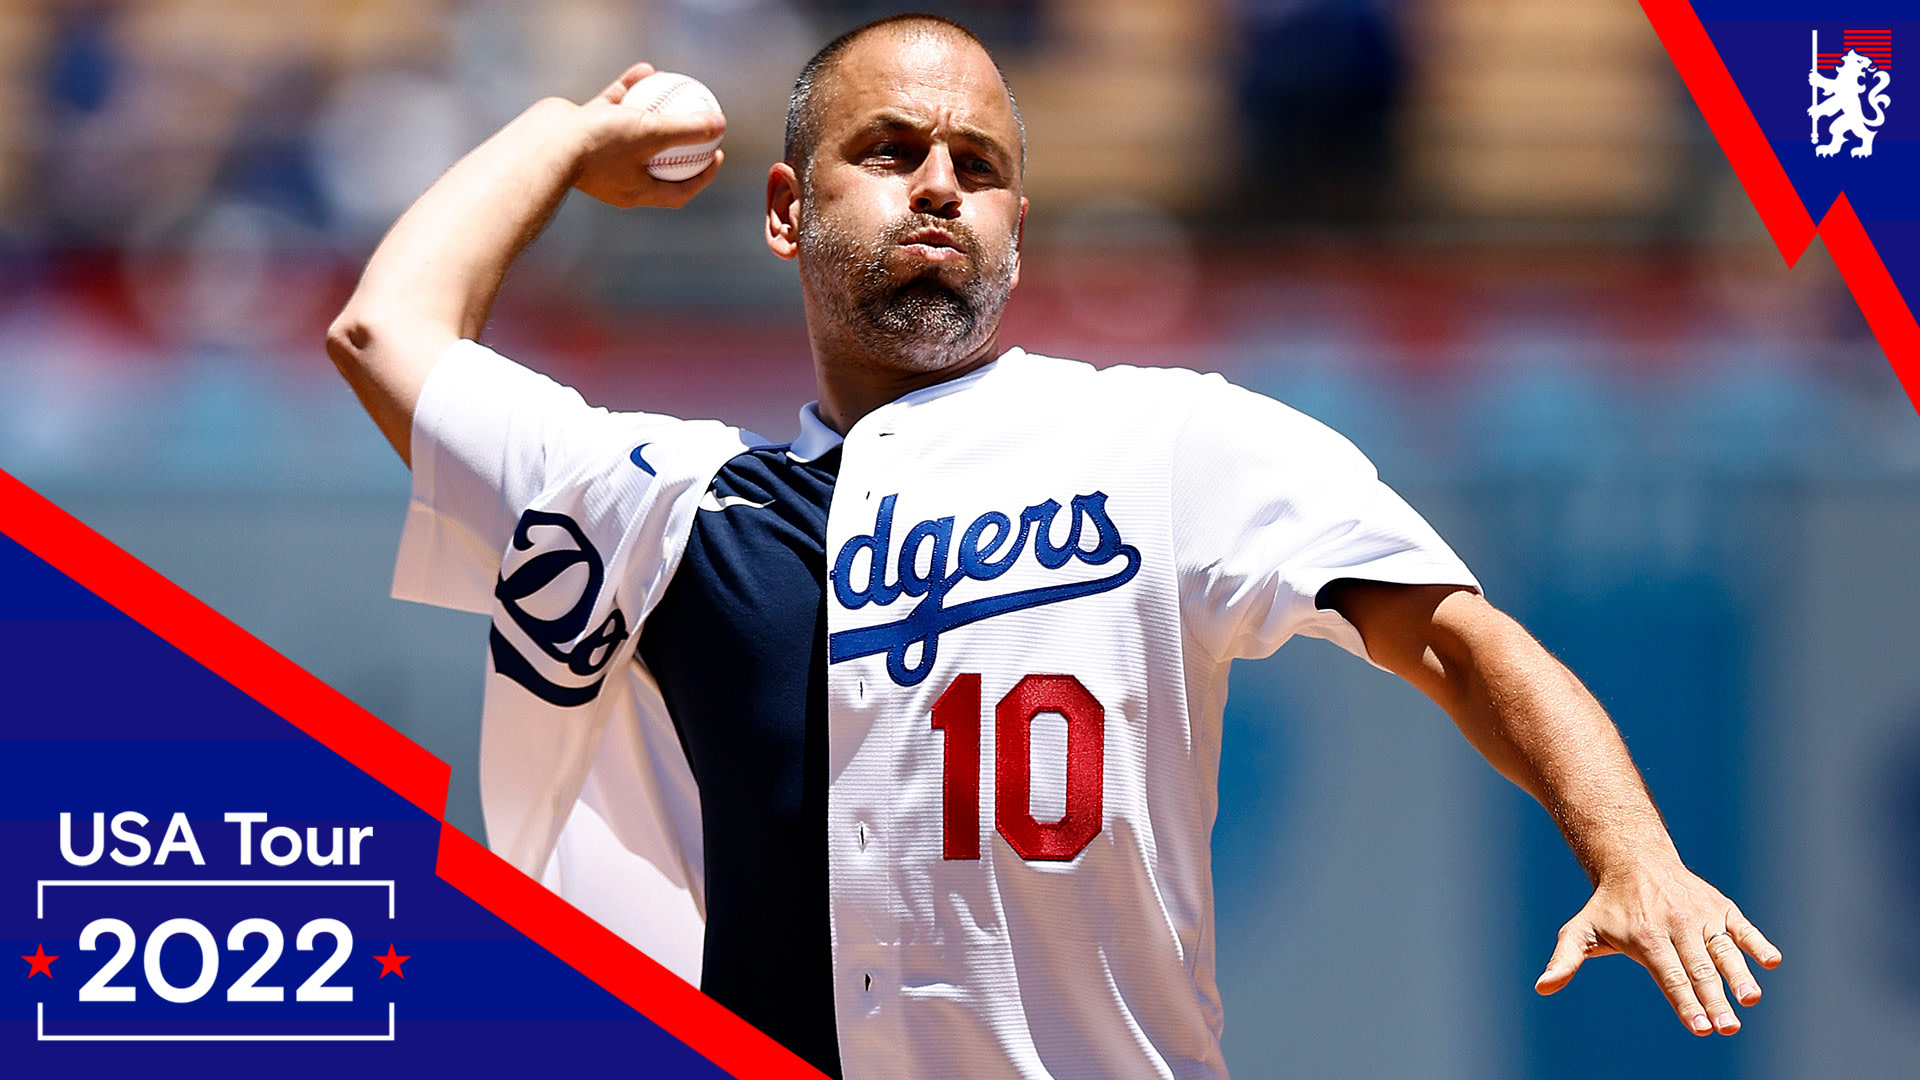 Joe Cole throws the first pitch at Dodger Stadium! ⚾️